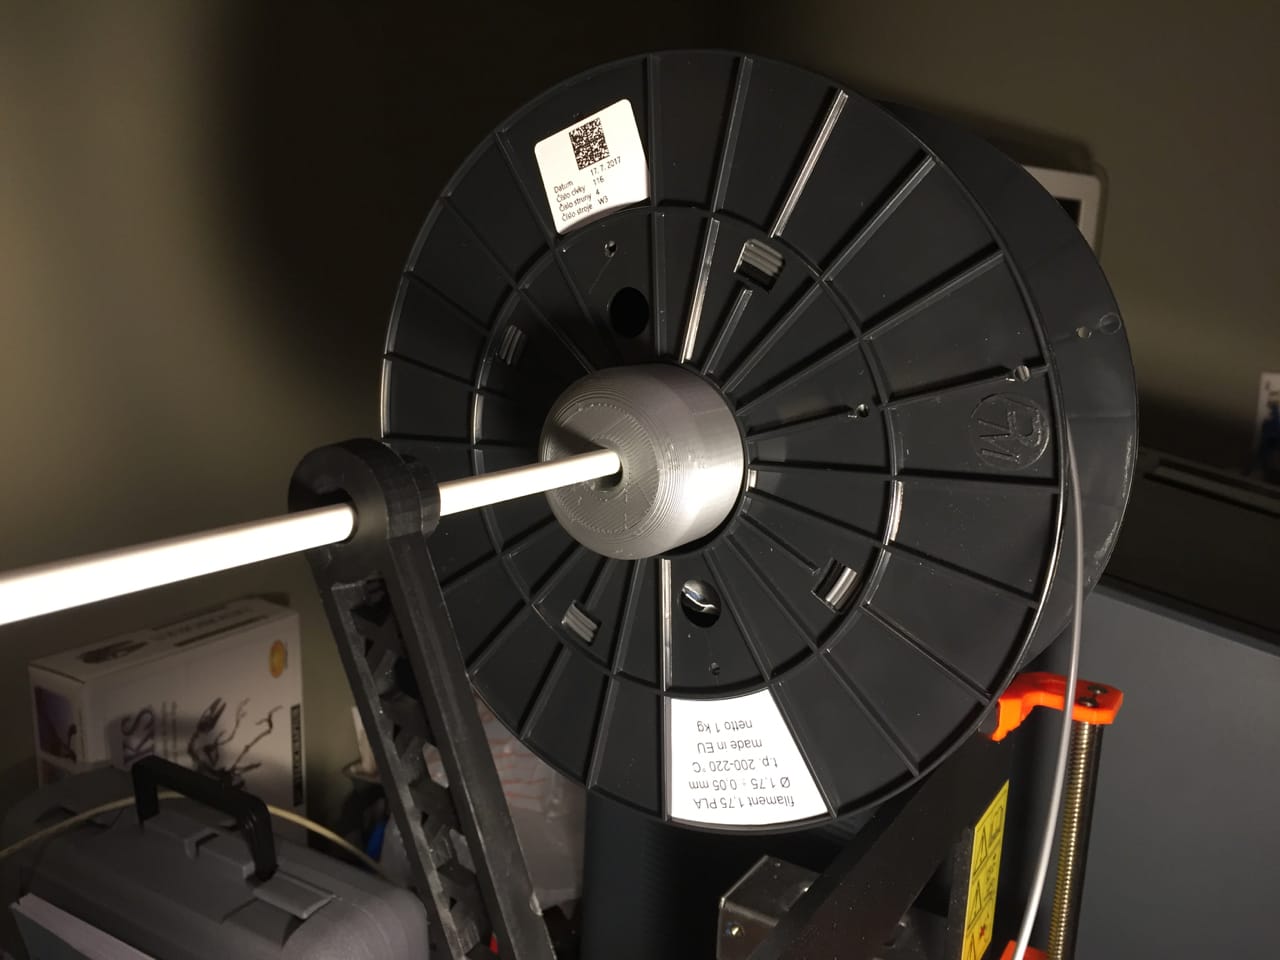  By adding some 3D printed adapters, you can sometimes fit a spool to a 3D printer 